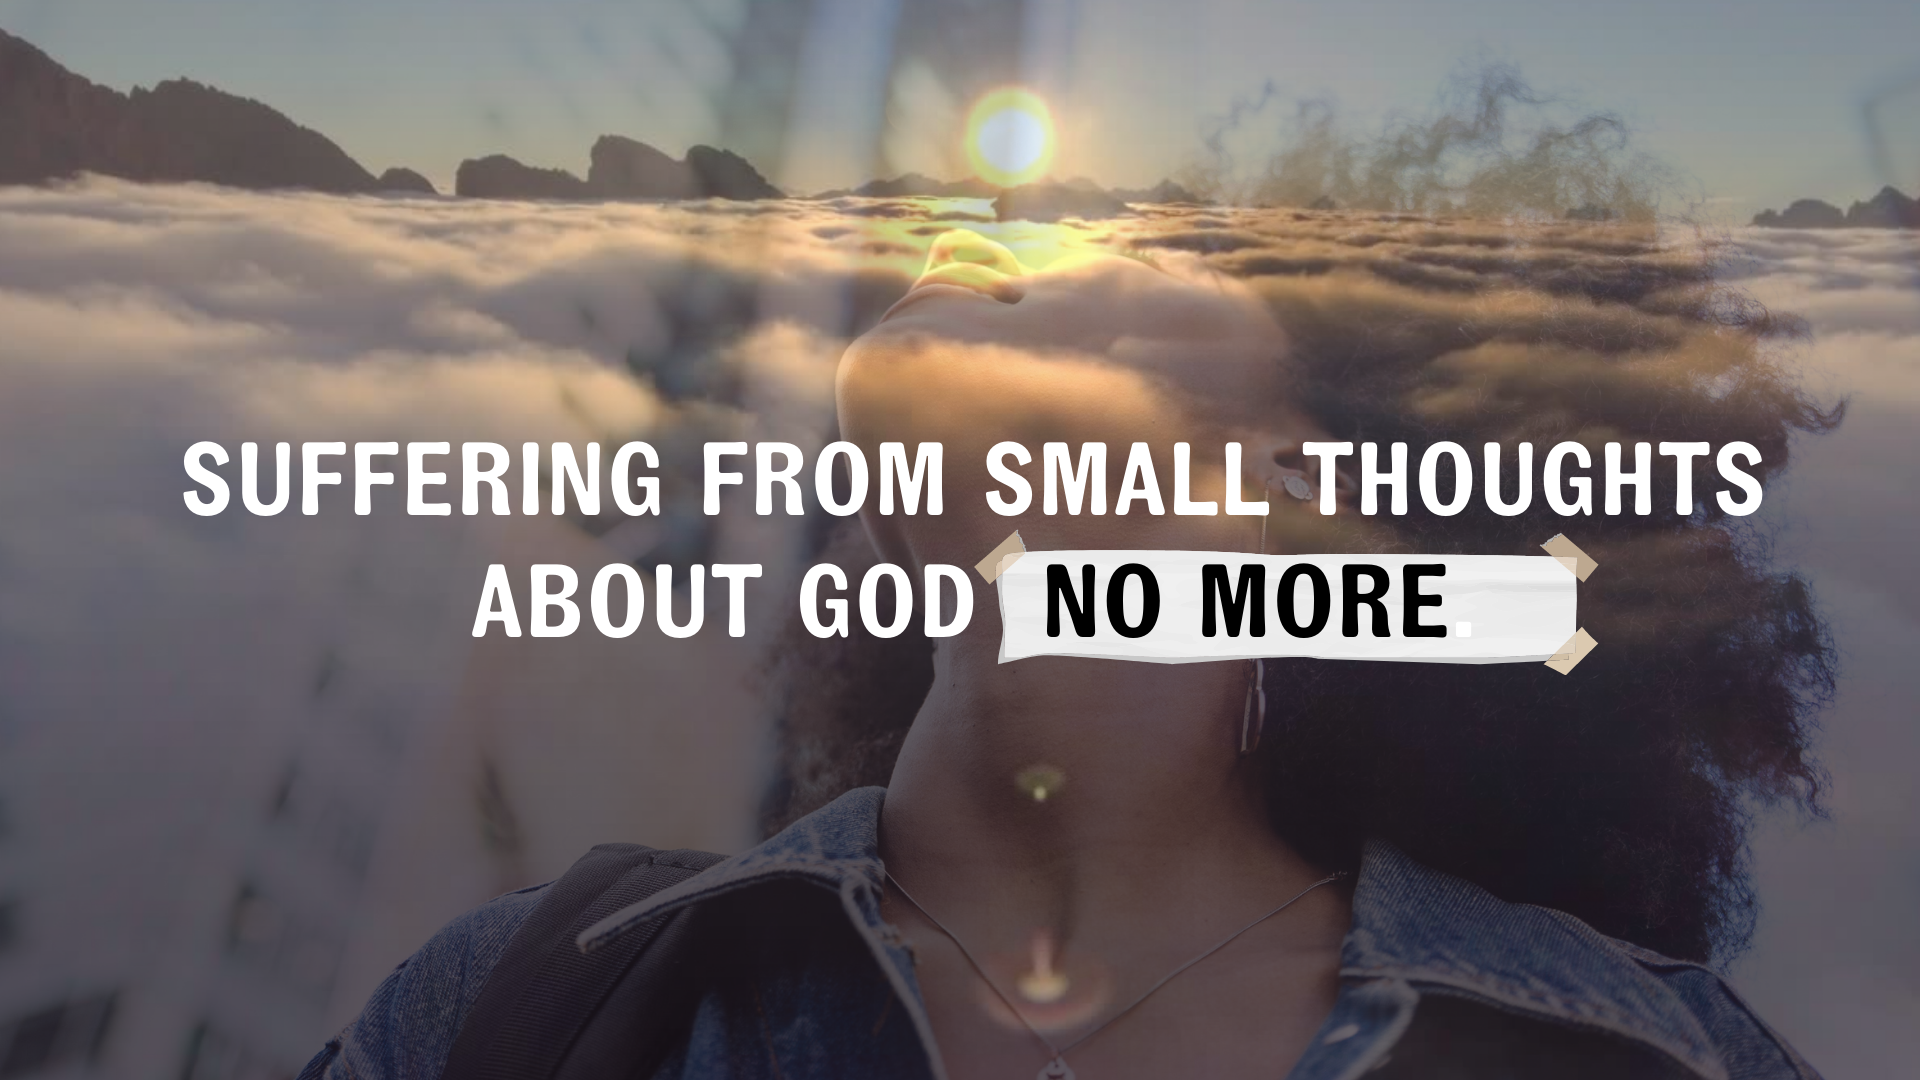 Suffering from small thoughts about God no more